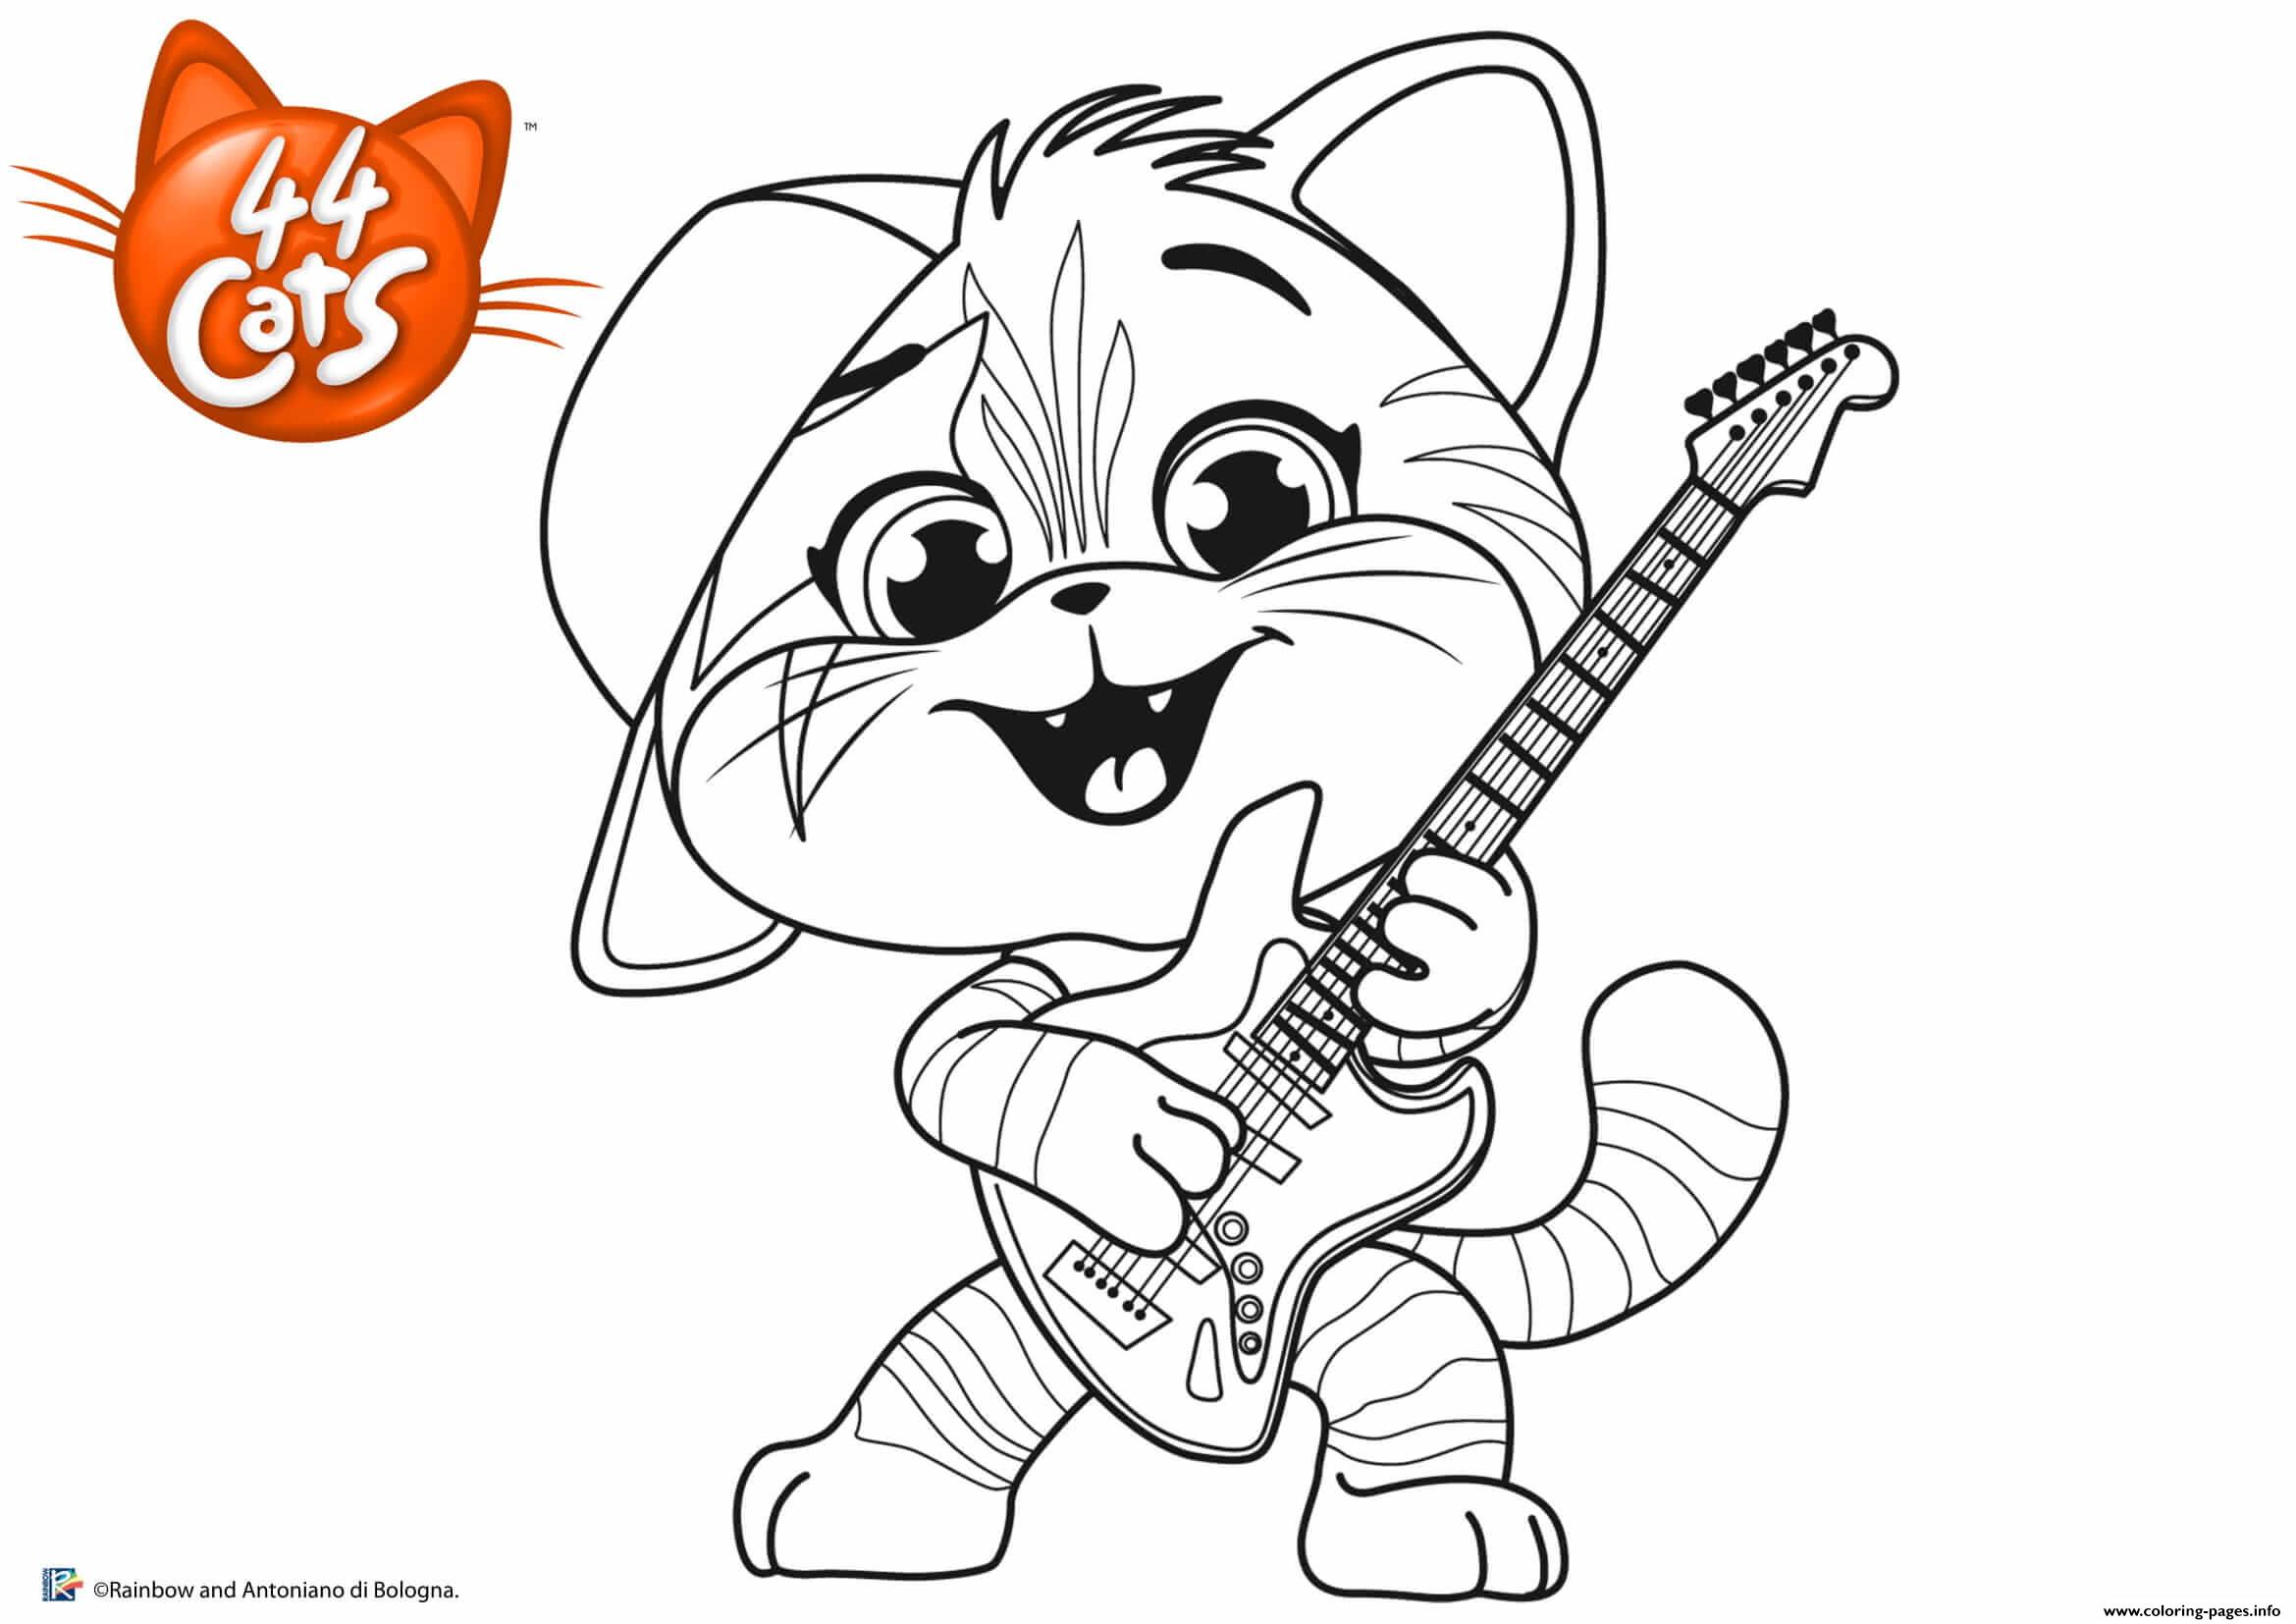 Download 44 Cats Lampo colouring image